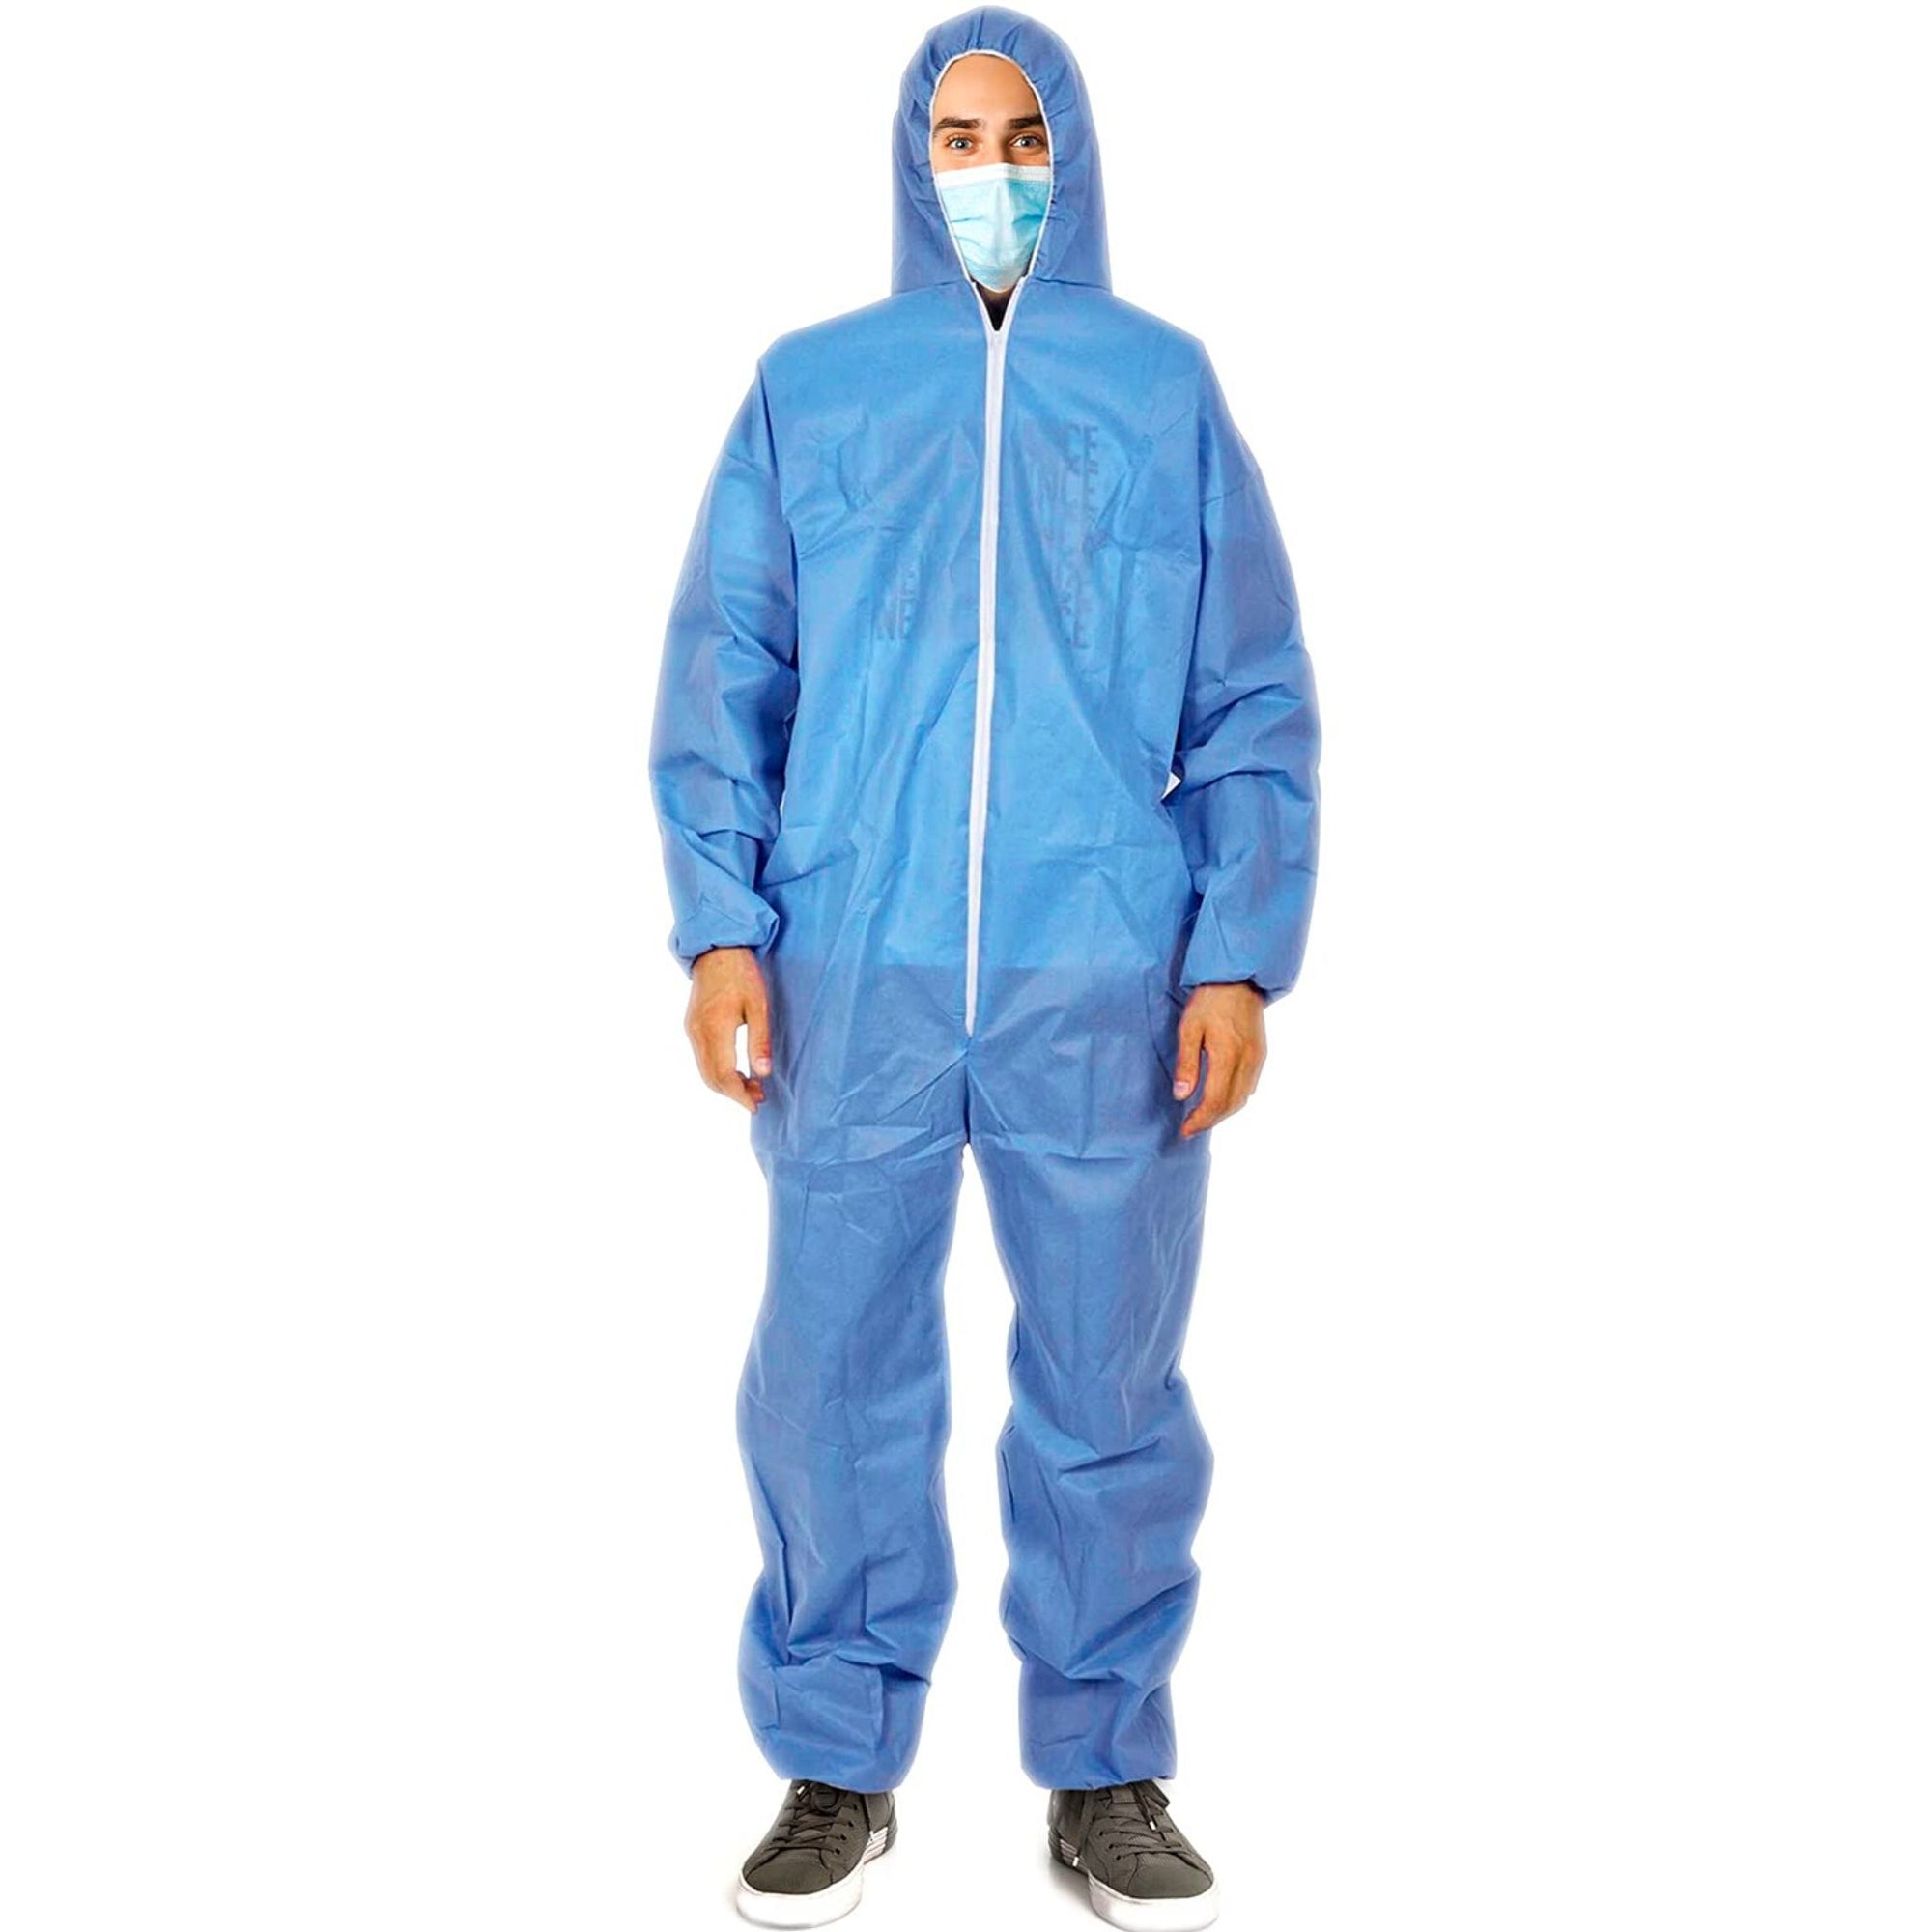 Blue Disposable Protective Overalls | Isolation Clothing | Exposure Hazmat Suit Coveralls - South East Clearance Centre